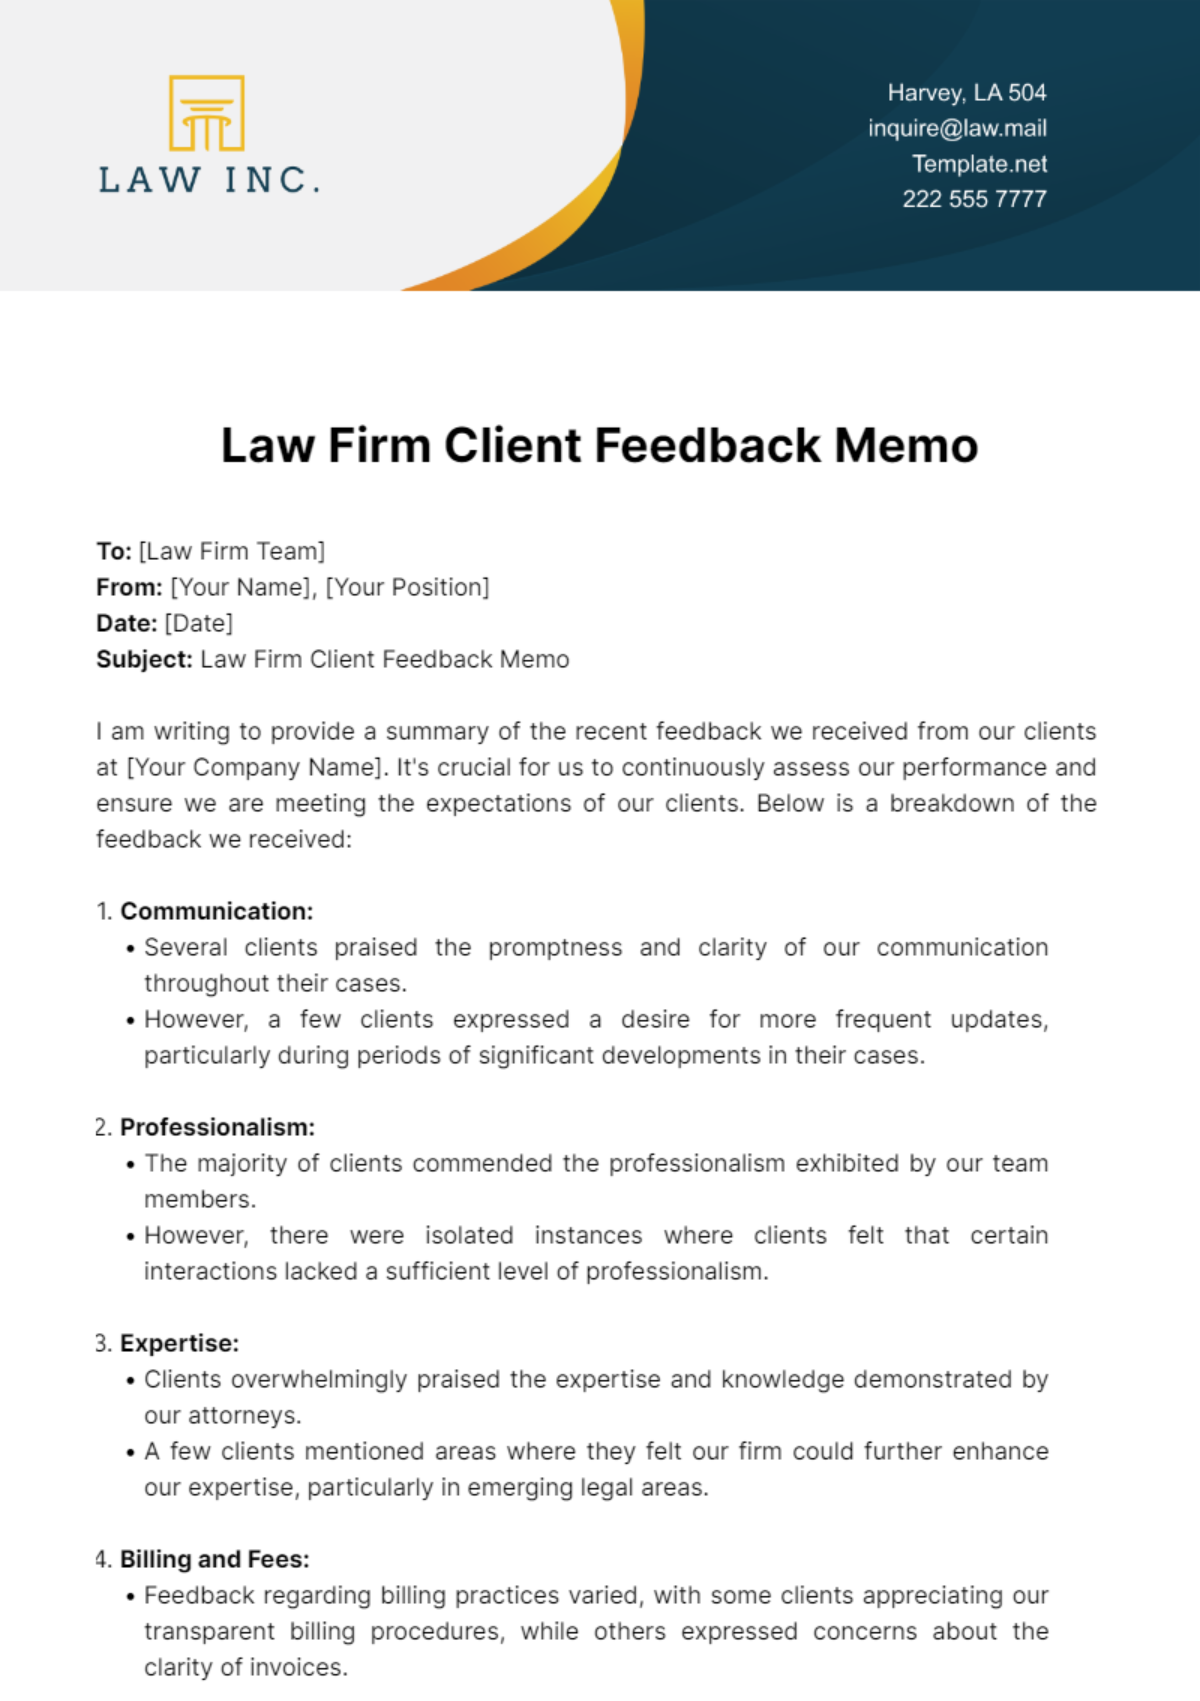 Law Firm Client Feedback Memo Template